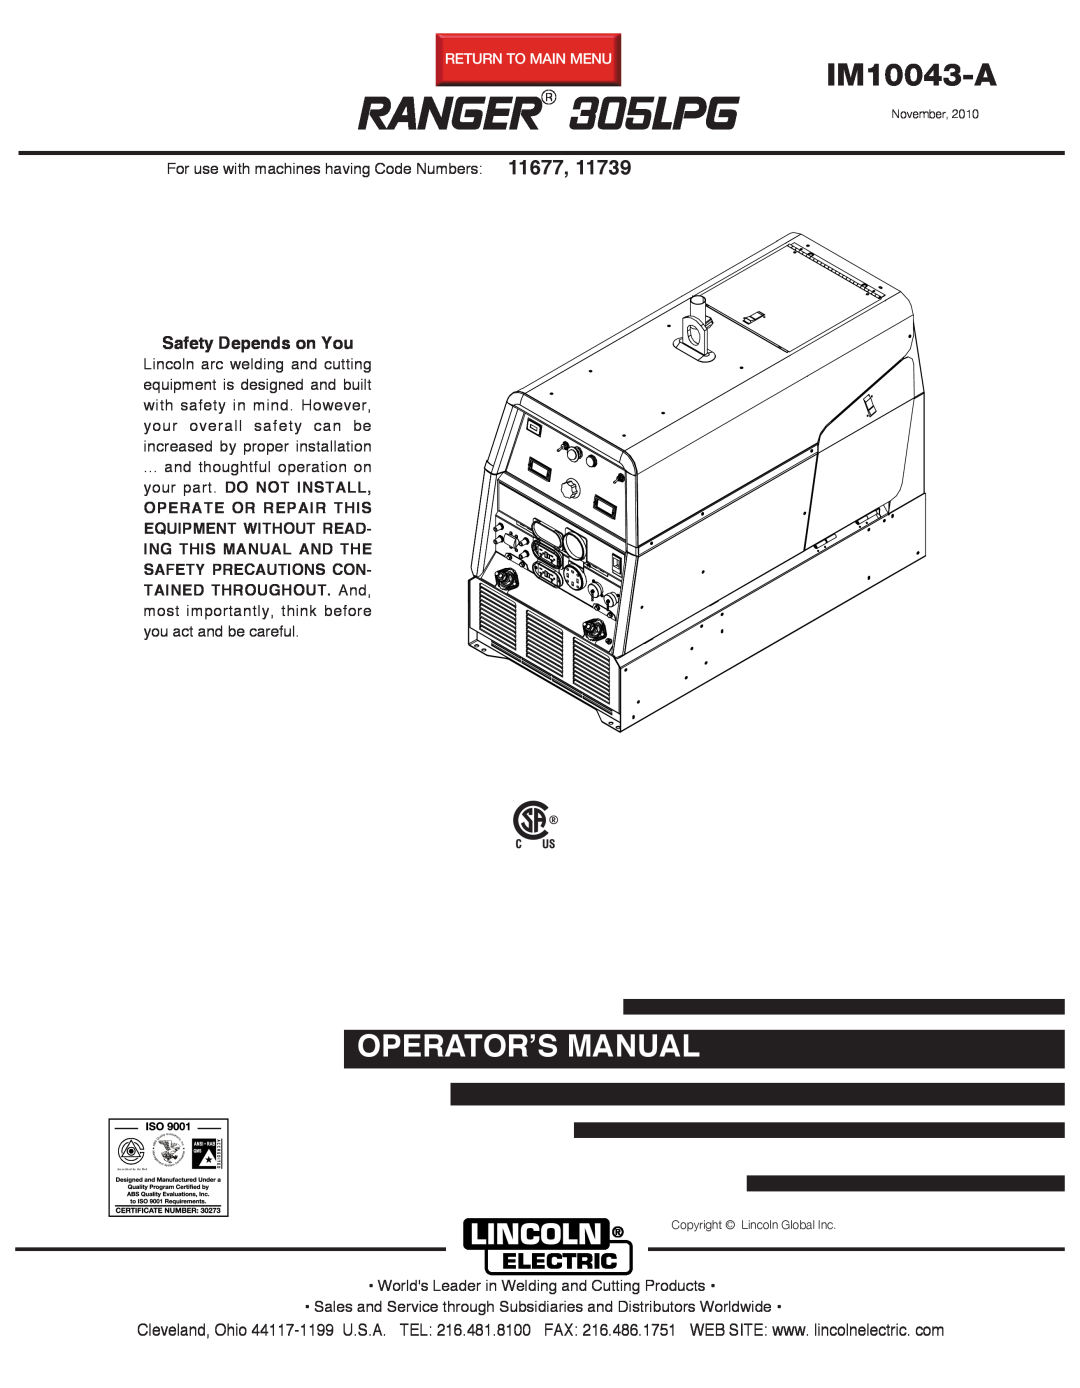 Lincoln Electric IM10043-A manual Ranger, 305LPG, Operator’S Manual, Safety Depends on You 